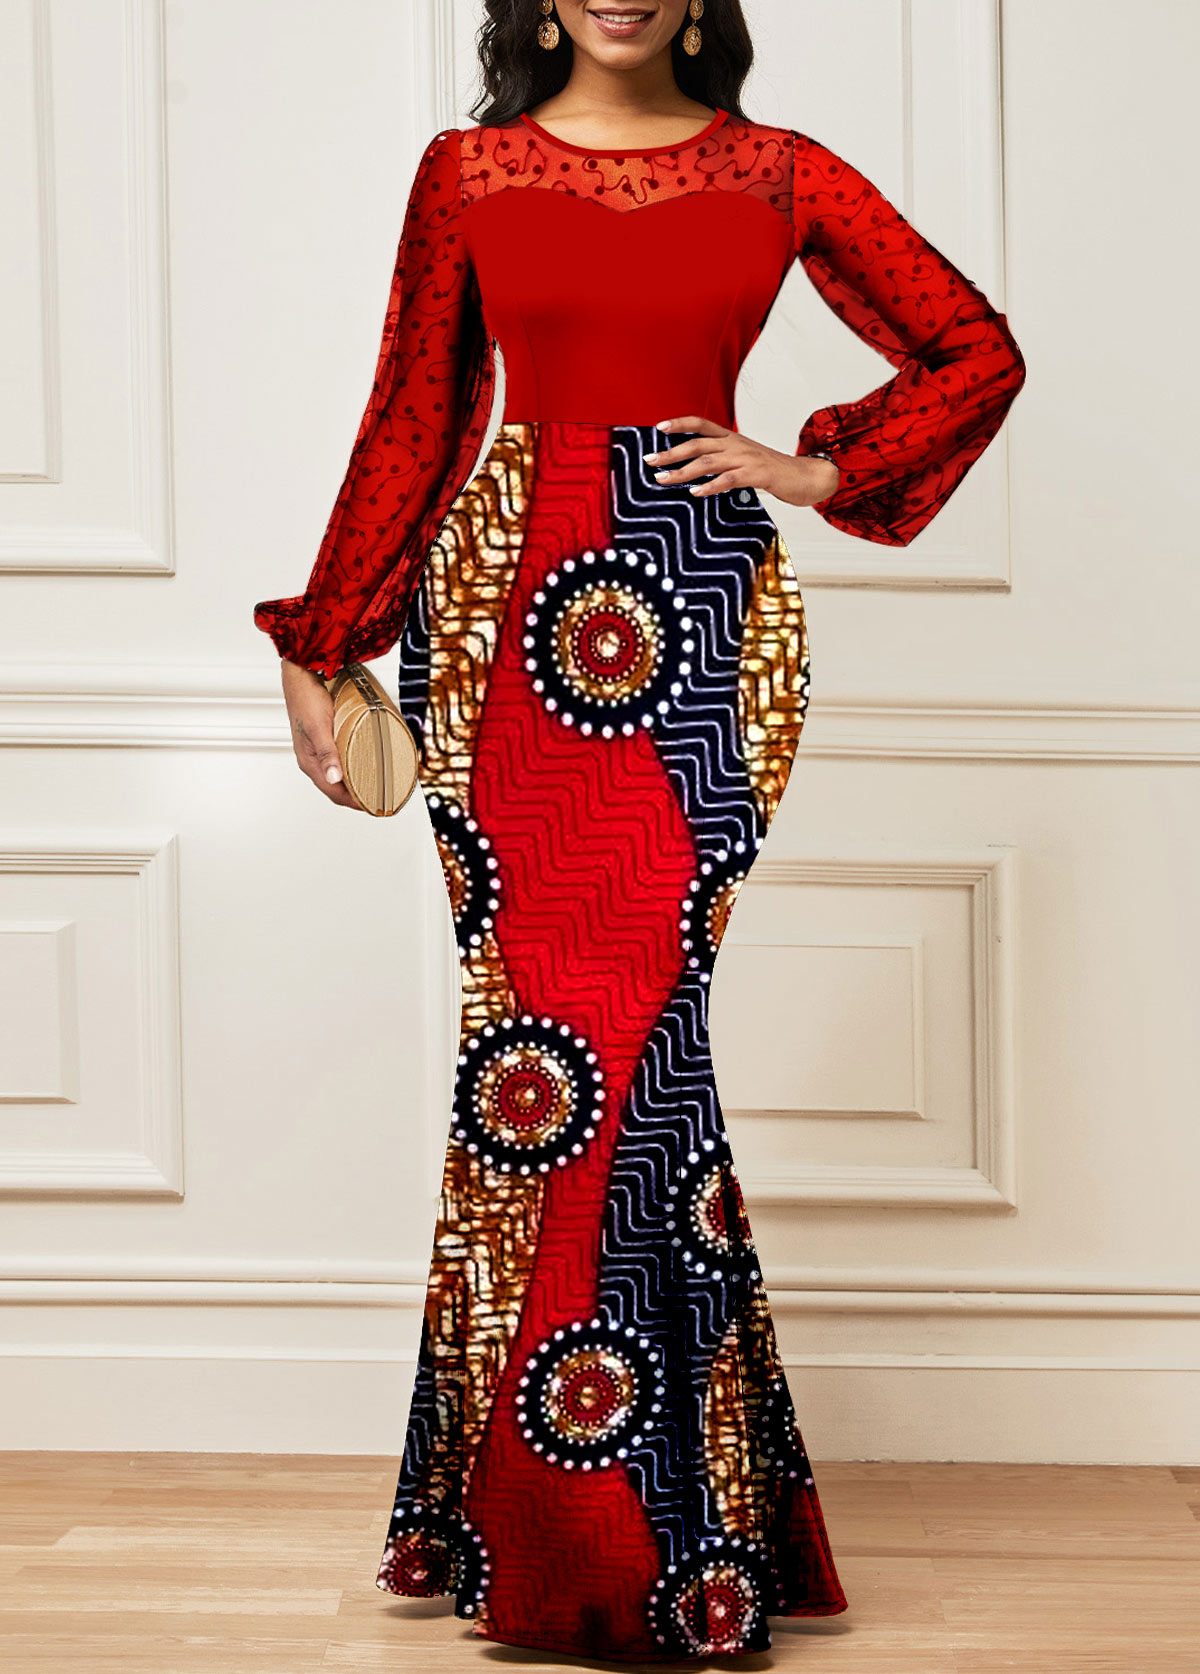 Tribal Print Lace Red Long Sleeve Maxi Bodycon Dress